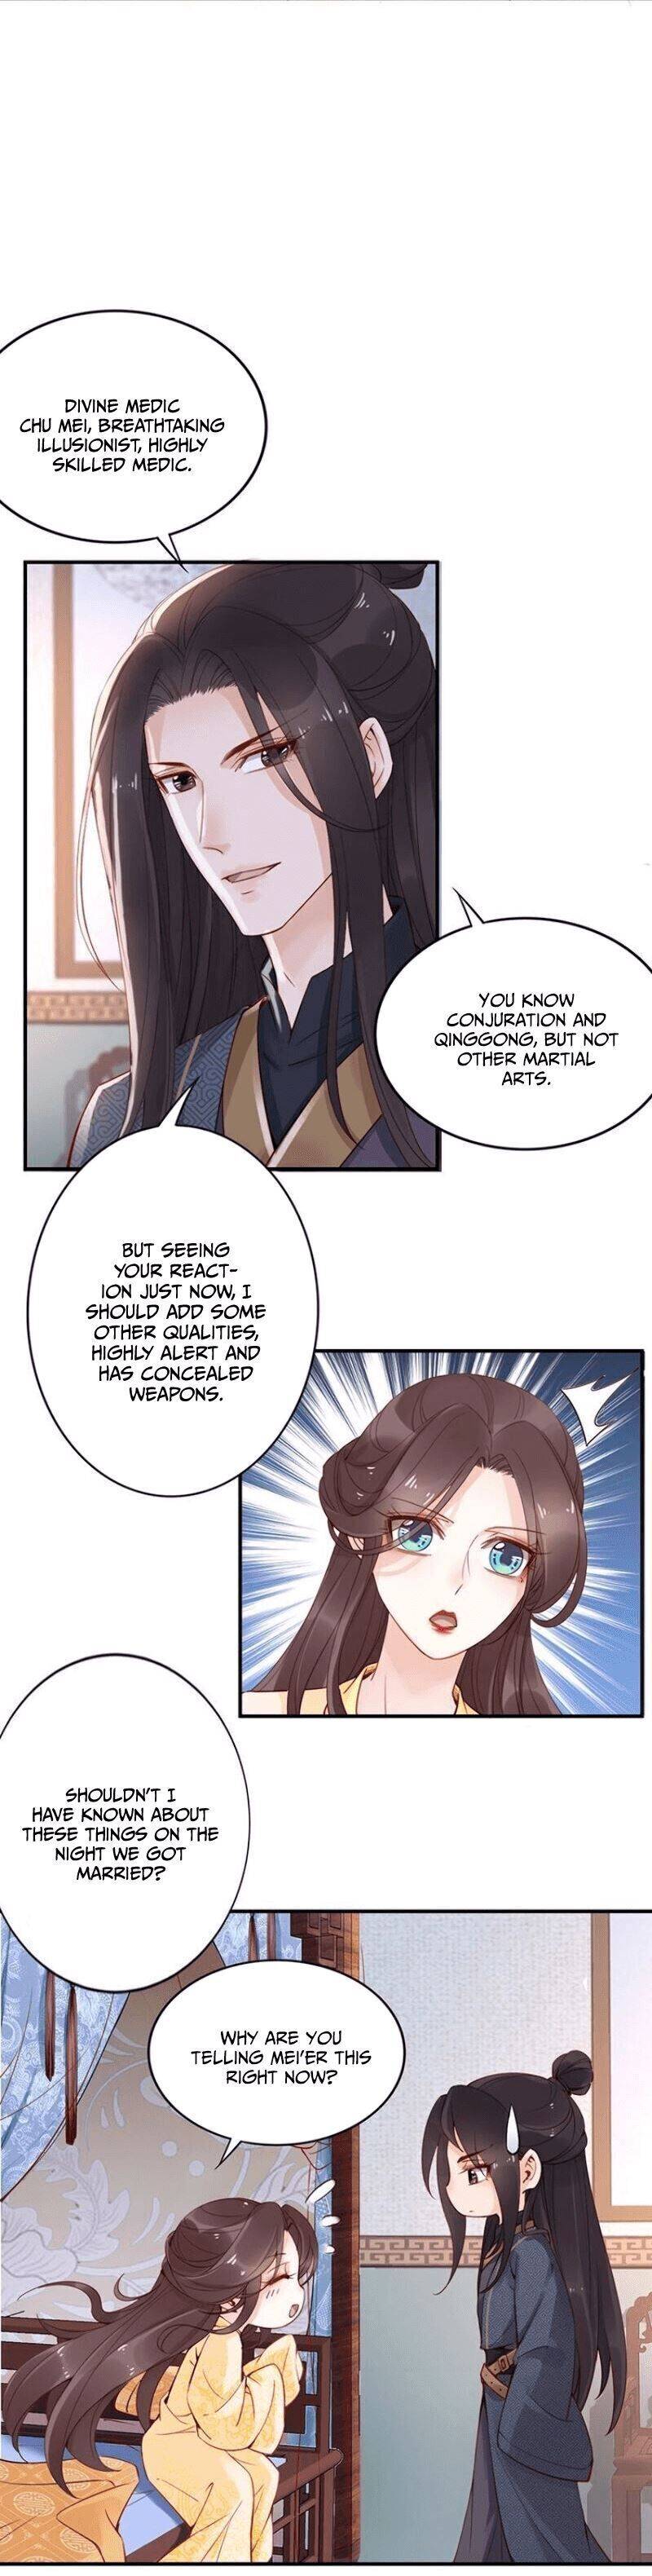 Soaring Phoenix From The East Palace - chapter 8 - #4